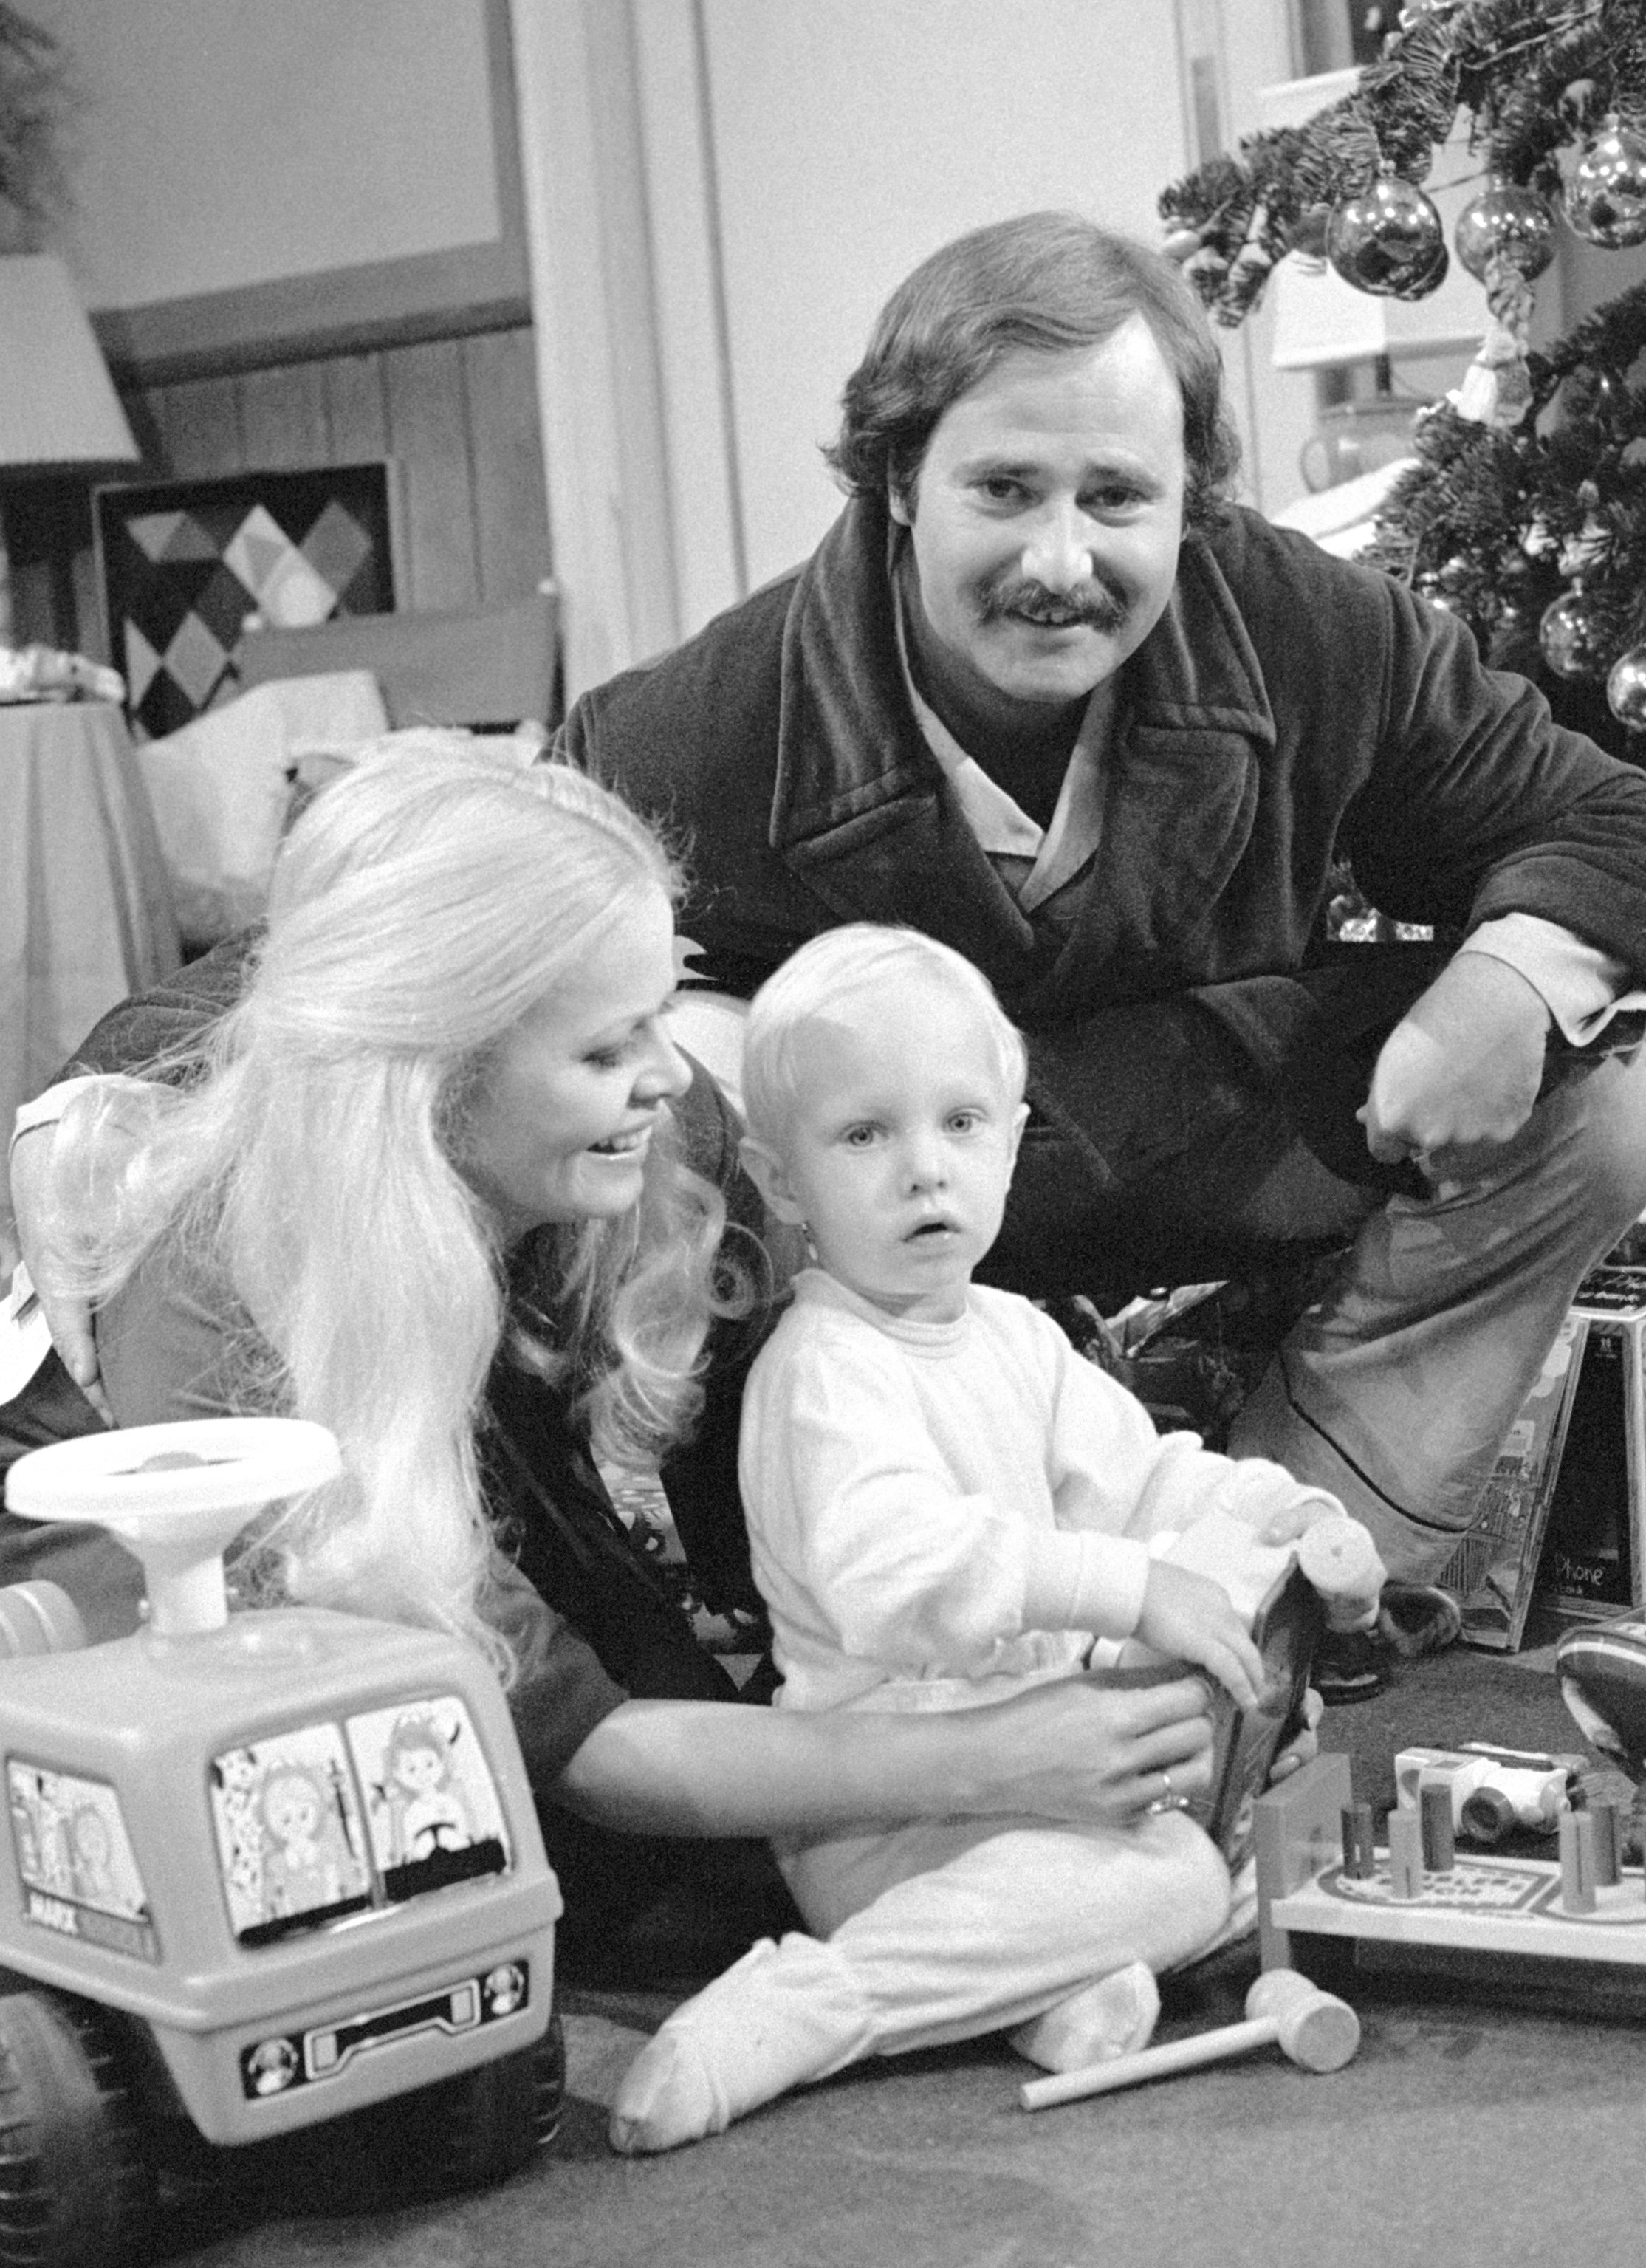  "All in the family" Actors (from left) Sally Struthers (as Gloria Bunker Stivic) and Justin Draeger (as Joey Stivic) and Rob Reiner as Michael Stivic in the episode 'Edith's Crisis of Faith: Part II'.  |  Source: Getty Images